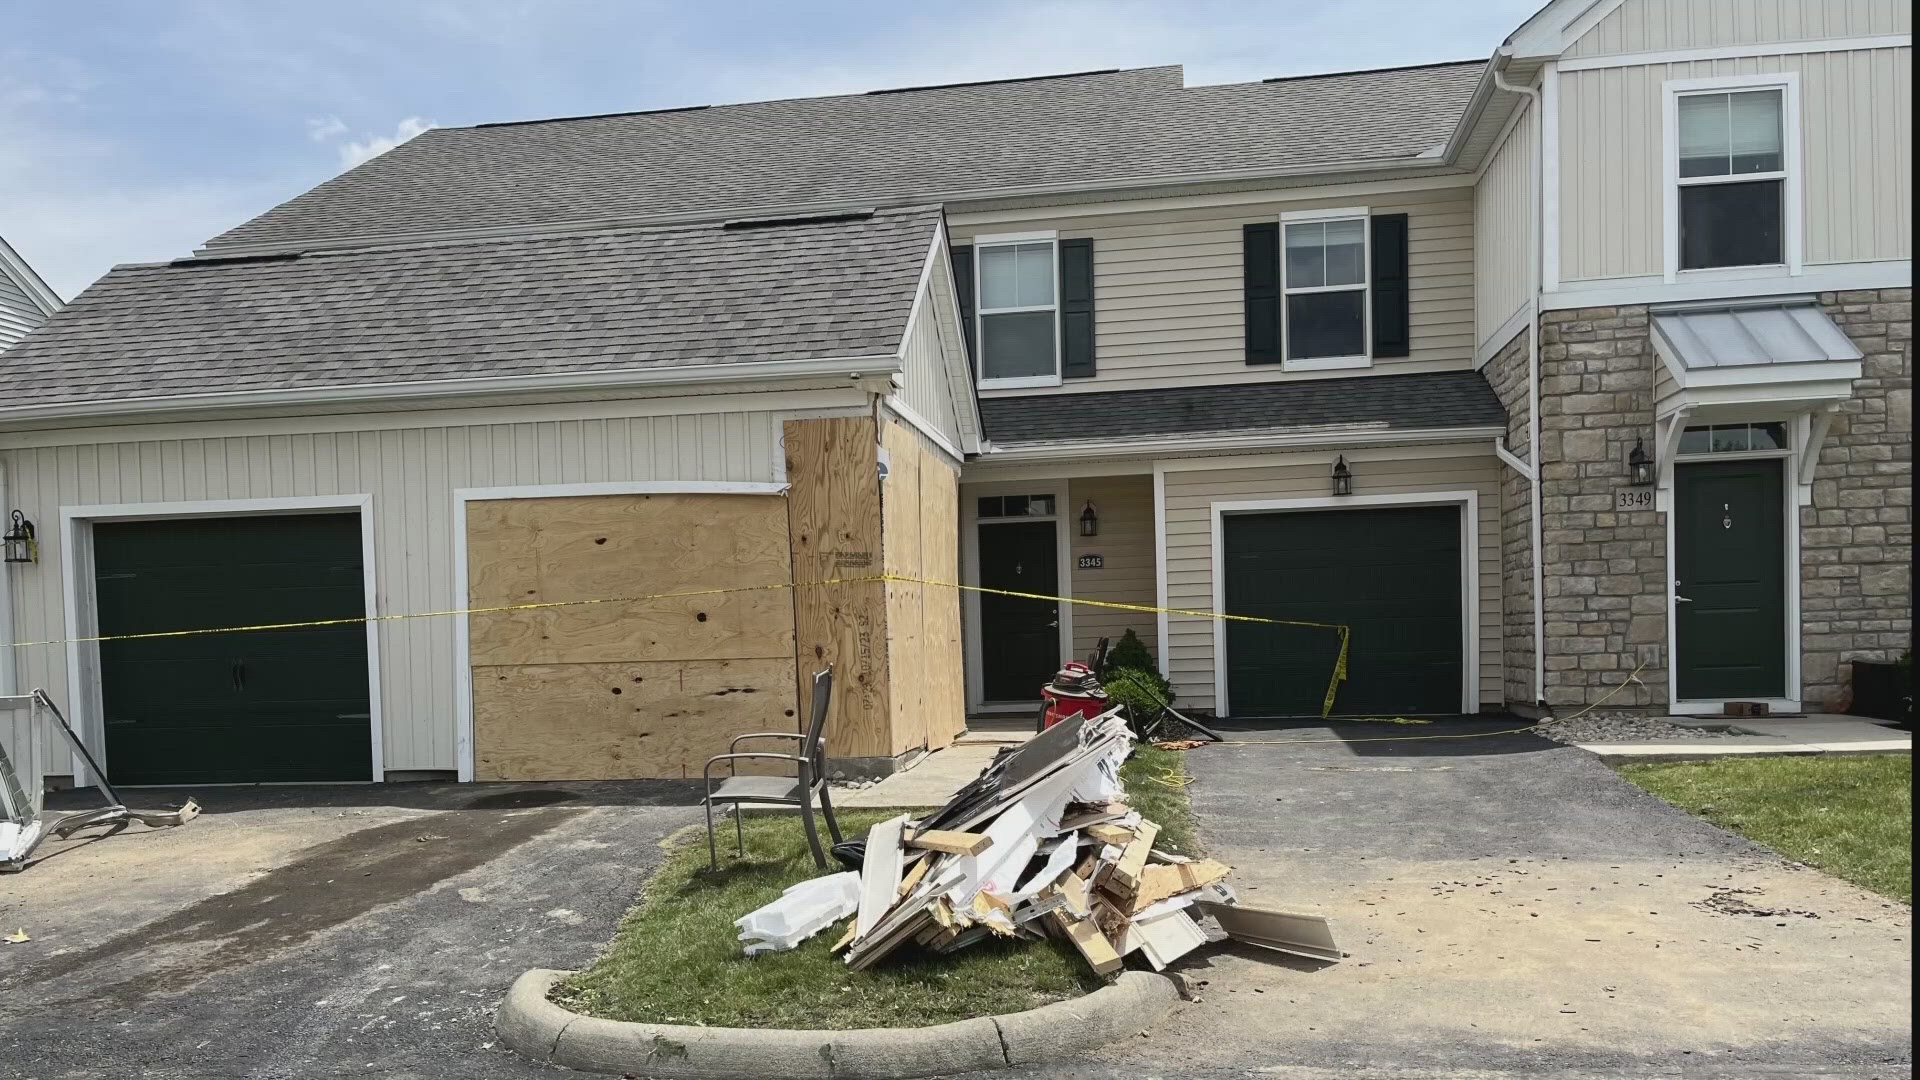 According to the Powell Police Department, the crash happened in the 3400 block of Club Way Court at Powell Grand Communities around 9:15 p.m on Monday.